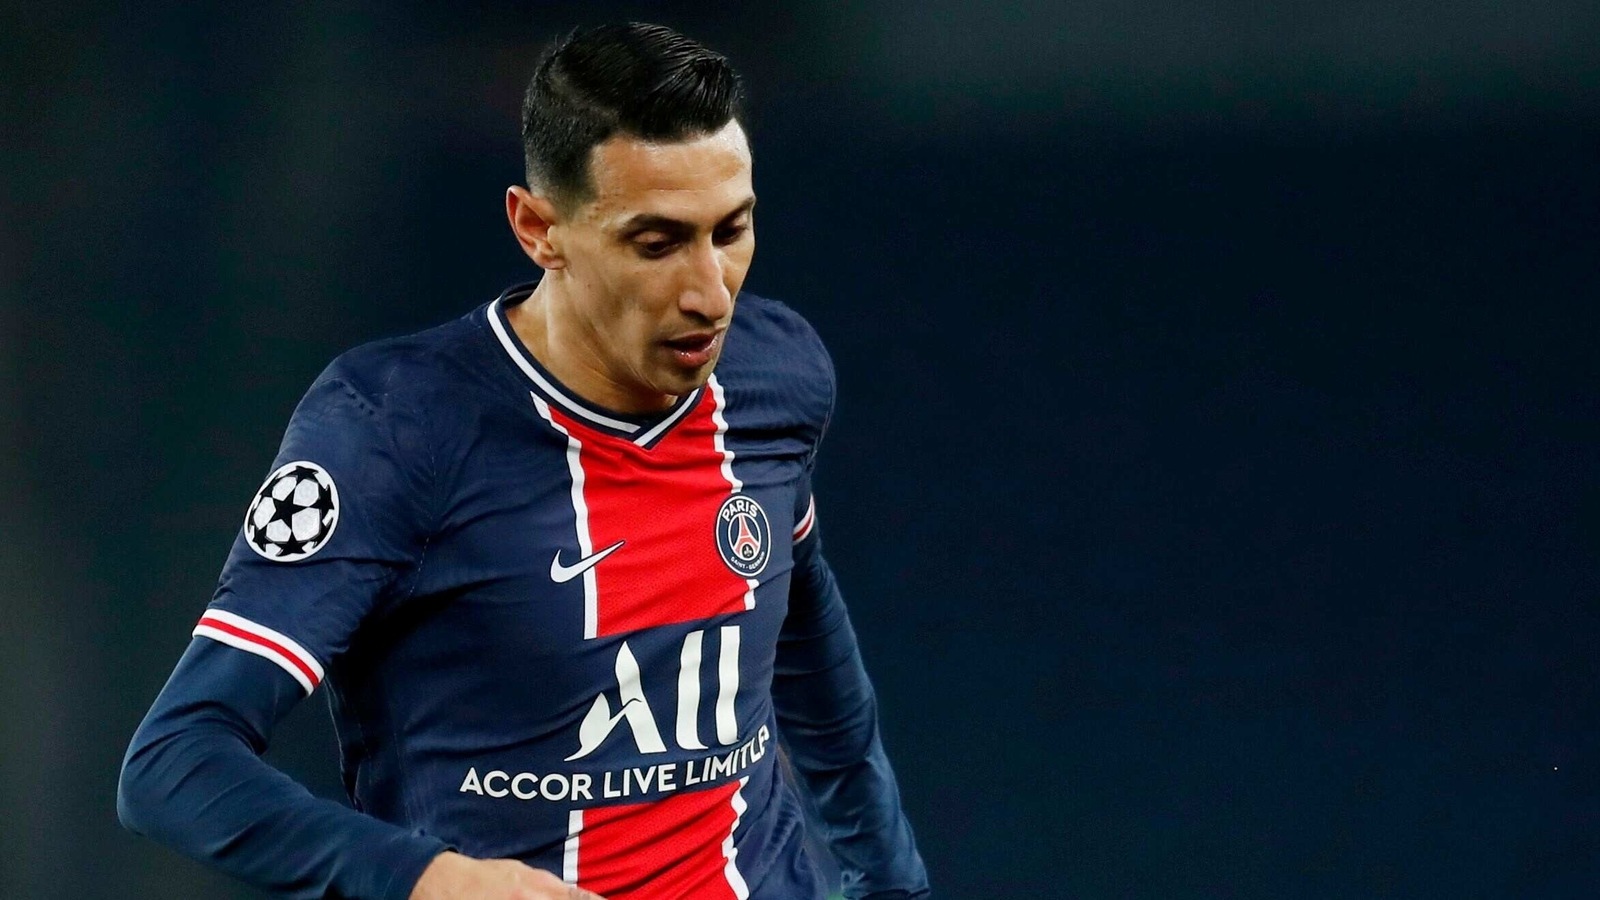 Di Maria leaves PSG game after reports of home break-in | Football News ...